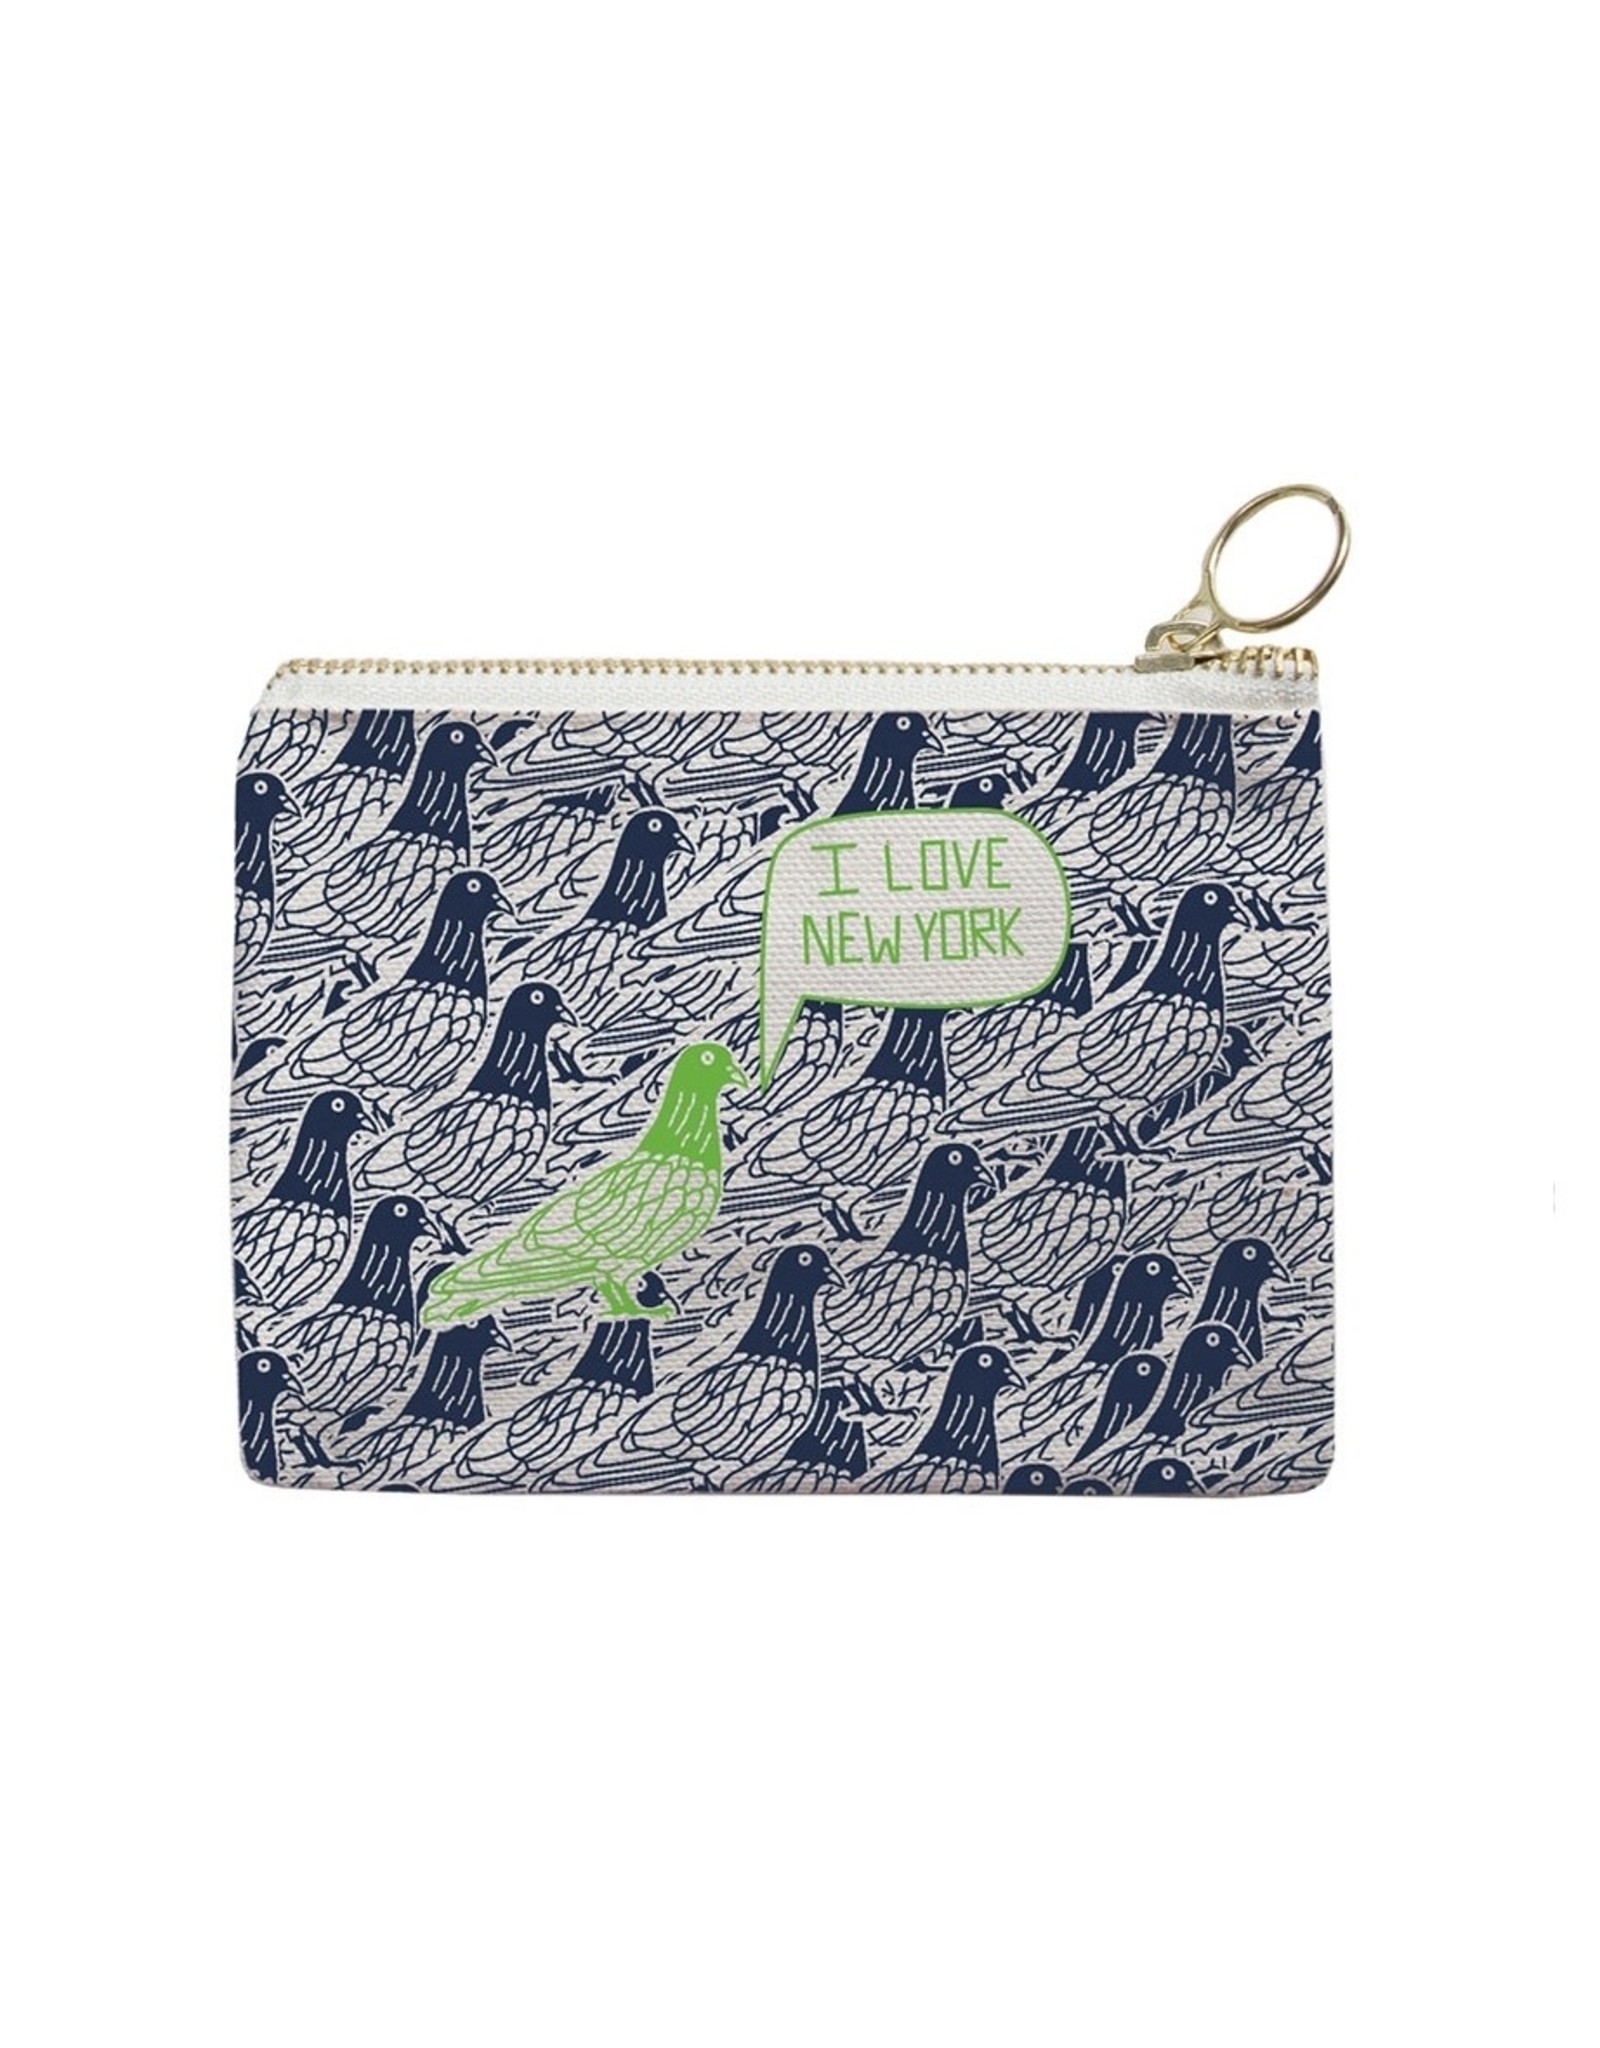 Maptote Maptote, New York City Coin Purse - Navy And Green